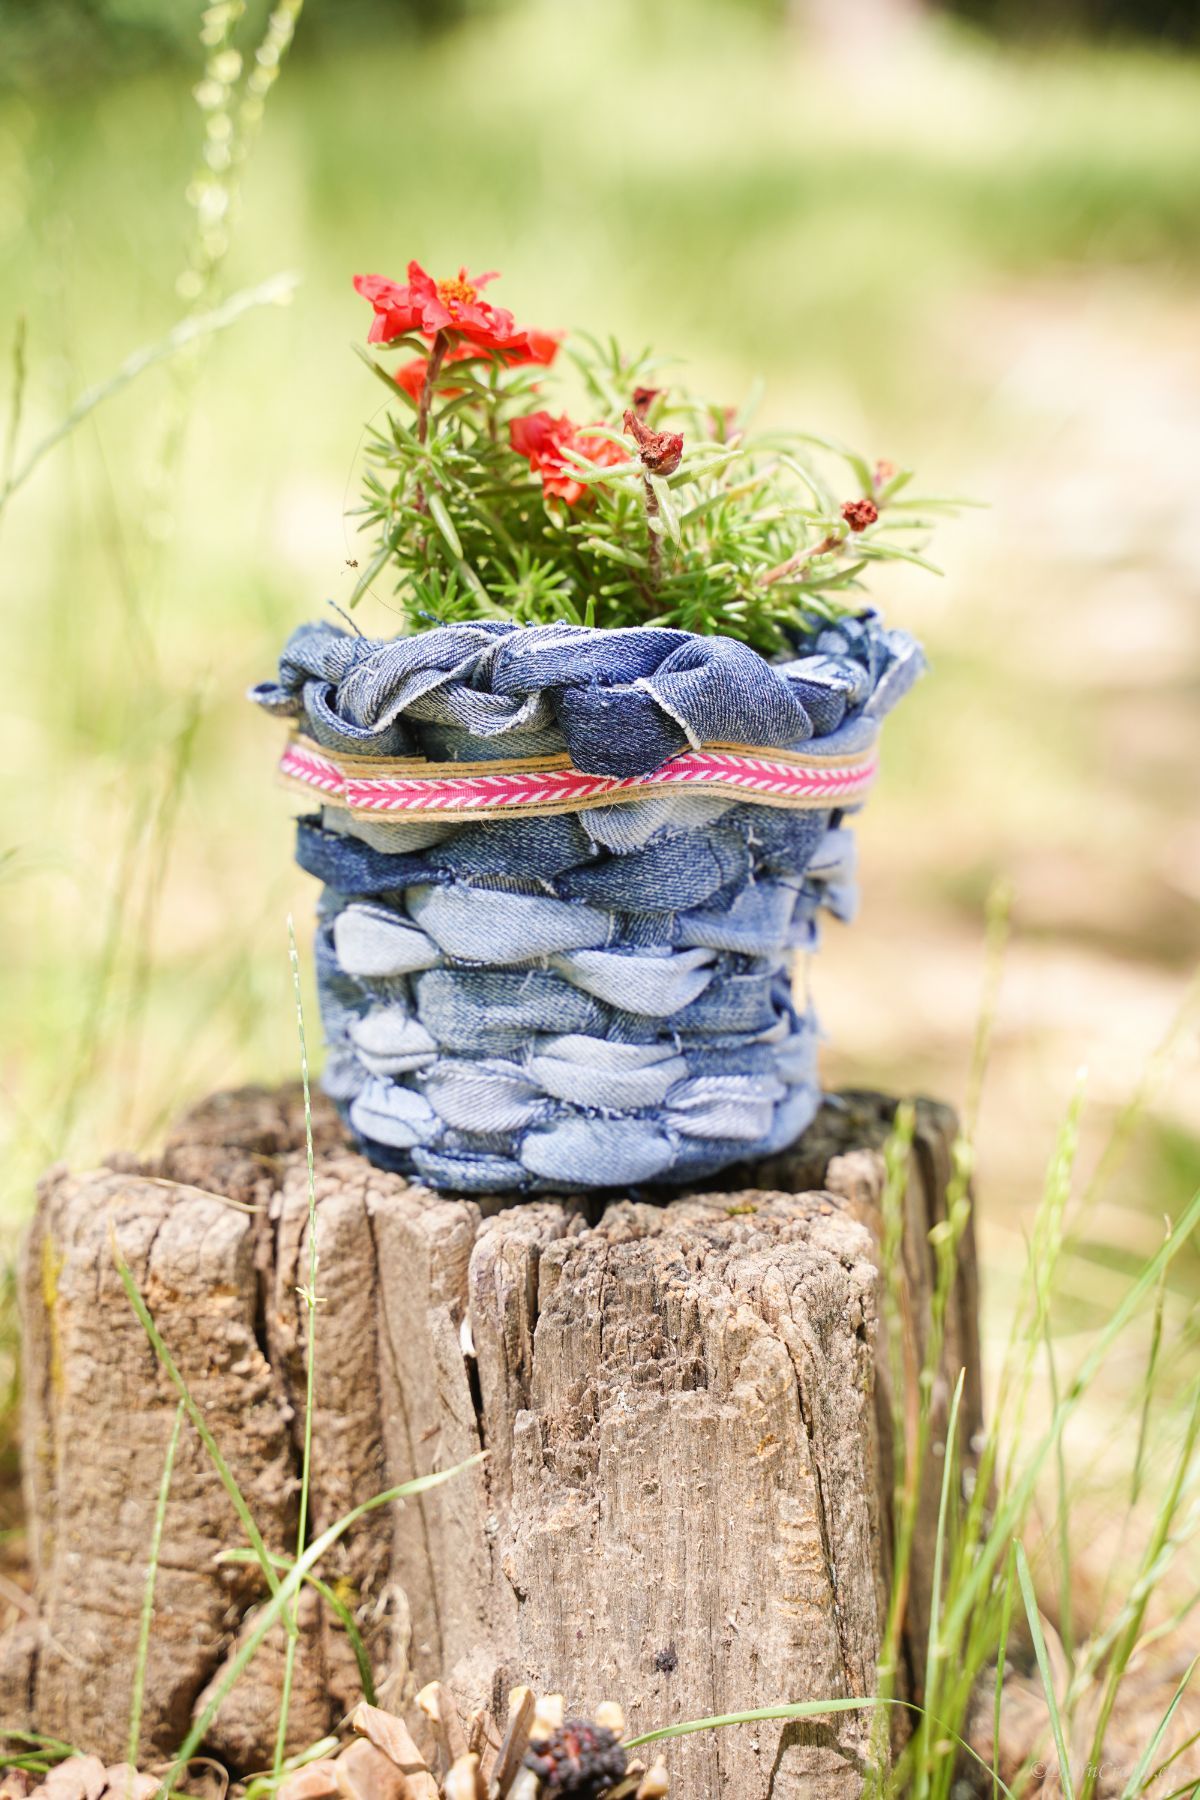 woven denim basket on tree stump with red flowers